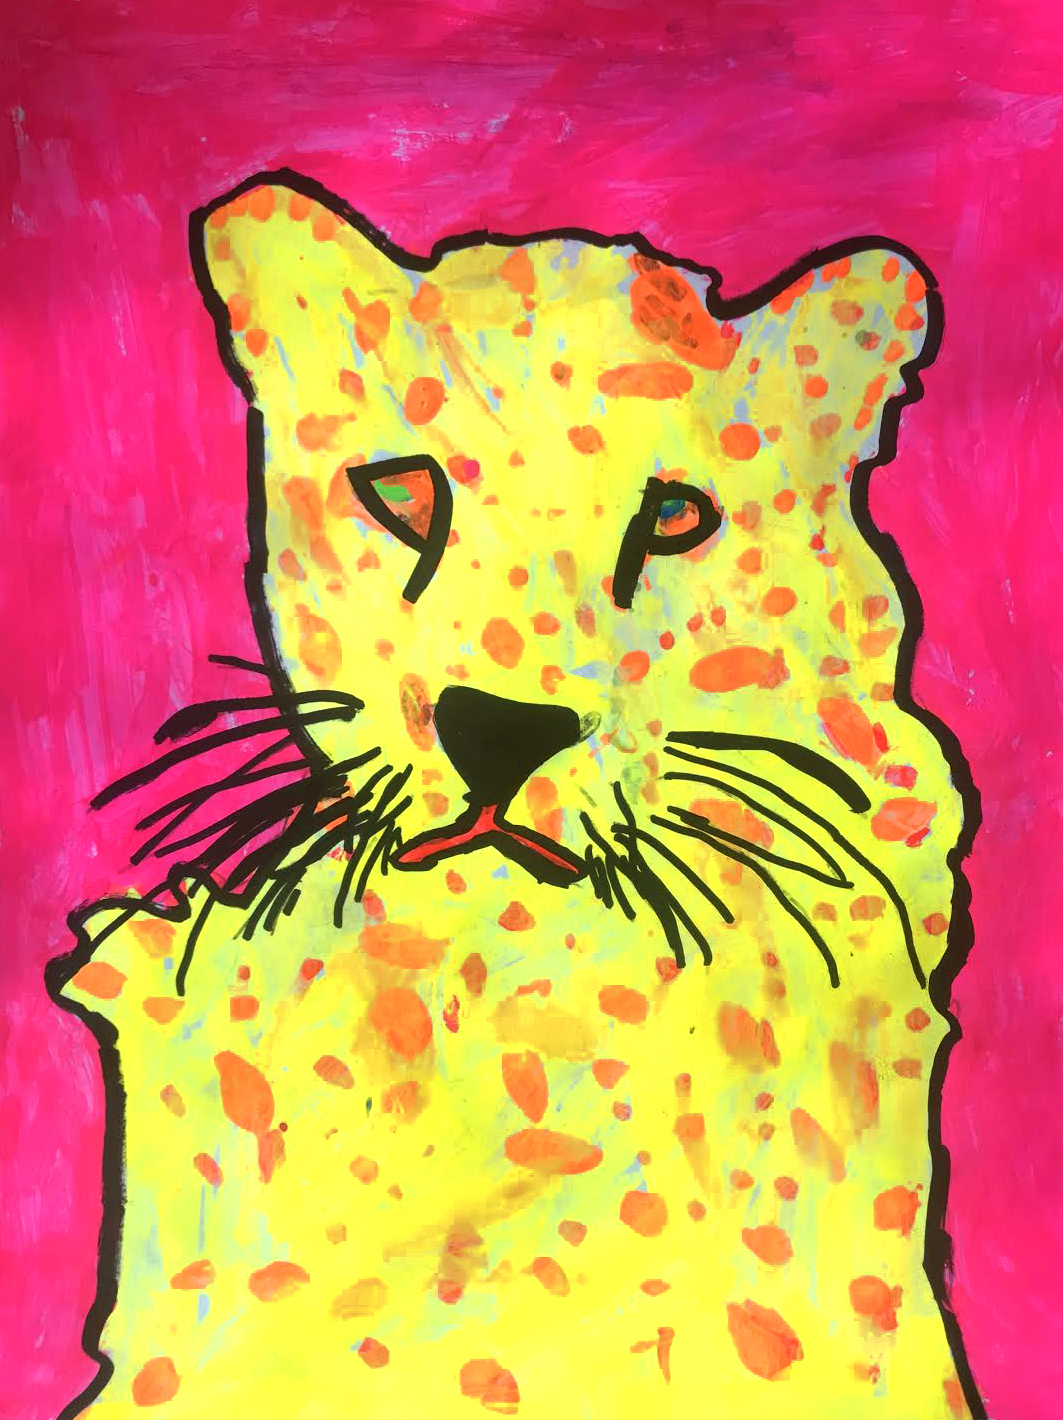 ANDY WARHOL INSPIRED ENDANGERED ANIMALS